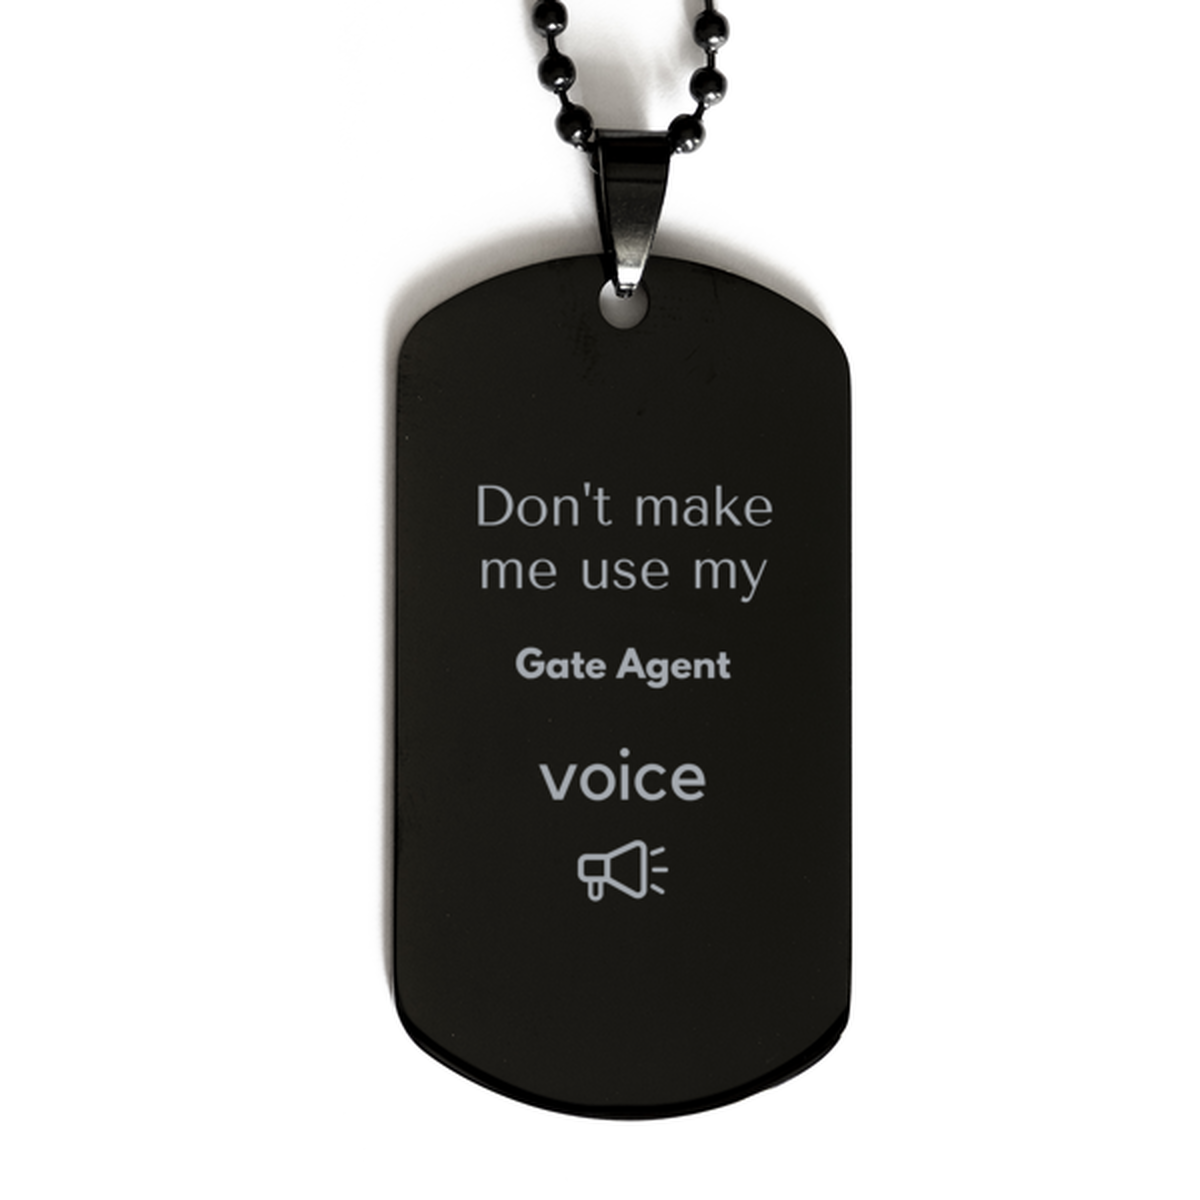 Don't make me use my Gate Agent voice, Sarcasm Gate Agent Gifts, Christmas Gate Agent Black Dog Tag Birthday Unique Gifts For Gate Agent Coworkers, Men, Women, Colleague, Friends